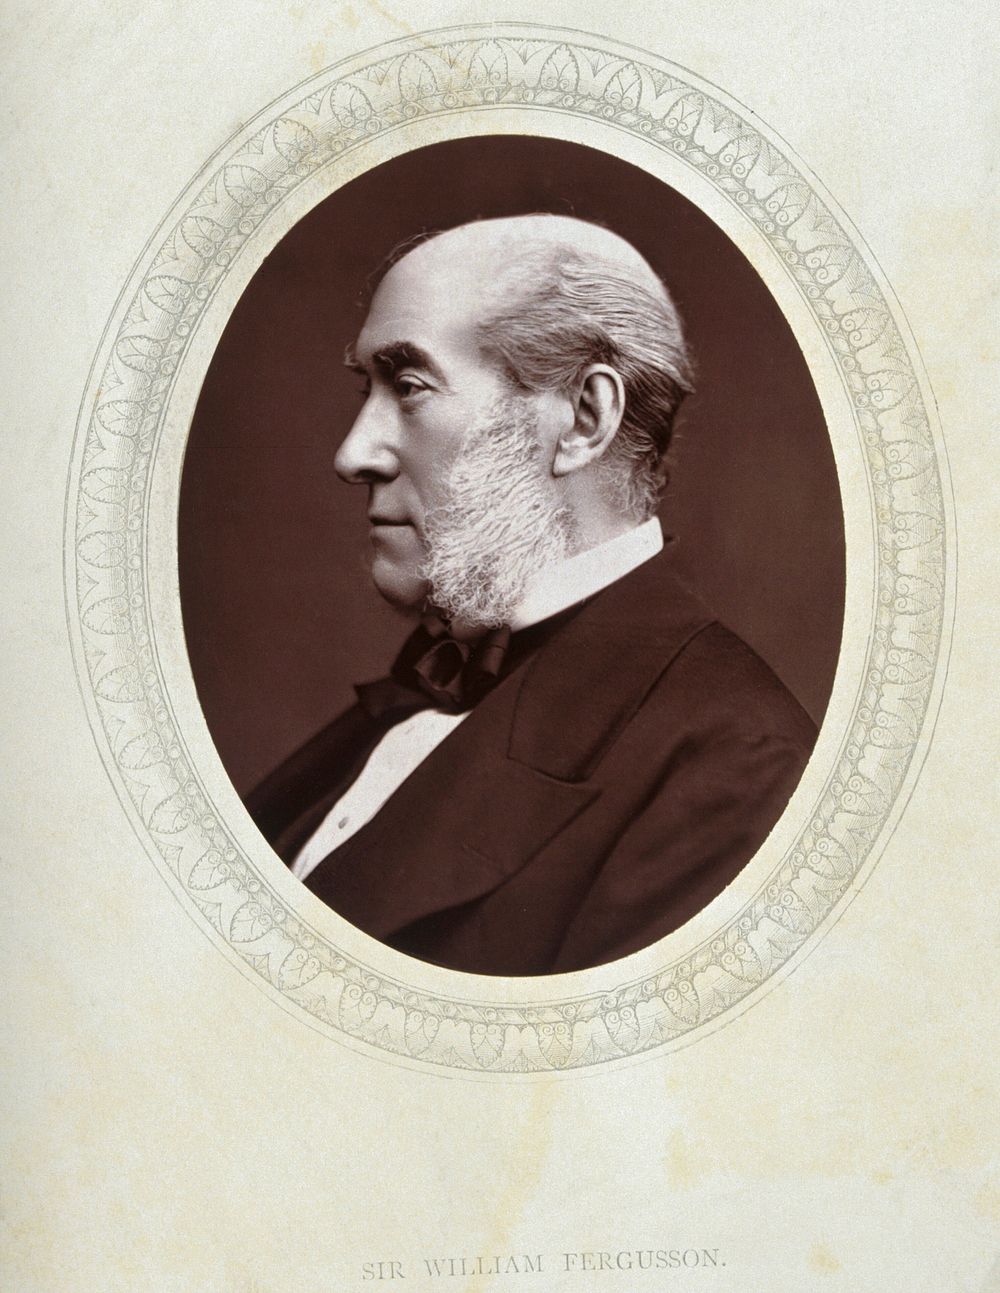 Sir William Fergusson. Photograph by Lock & Whitfield.